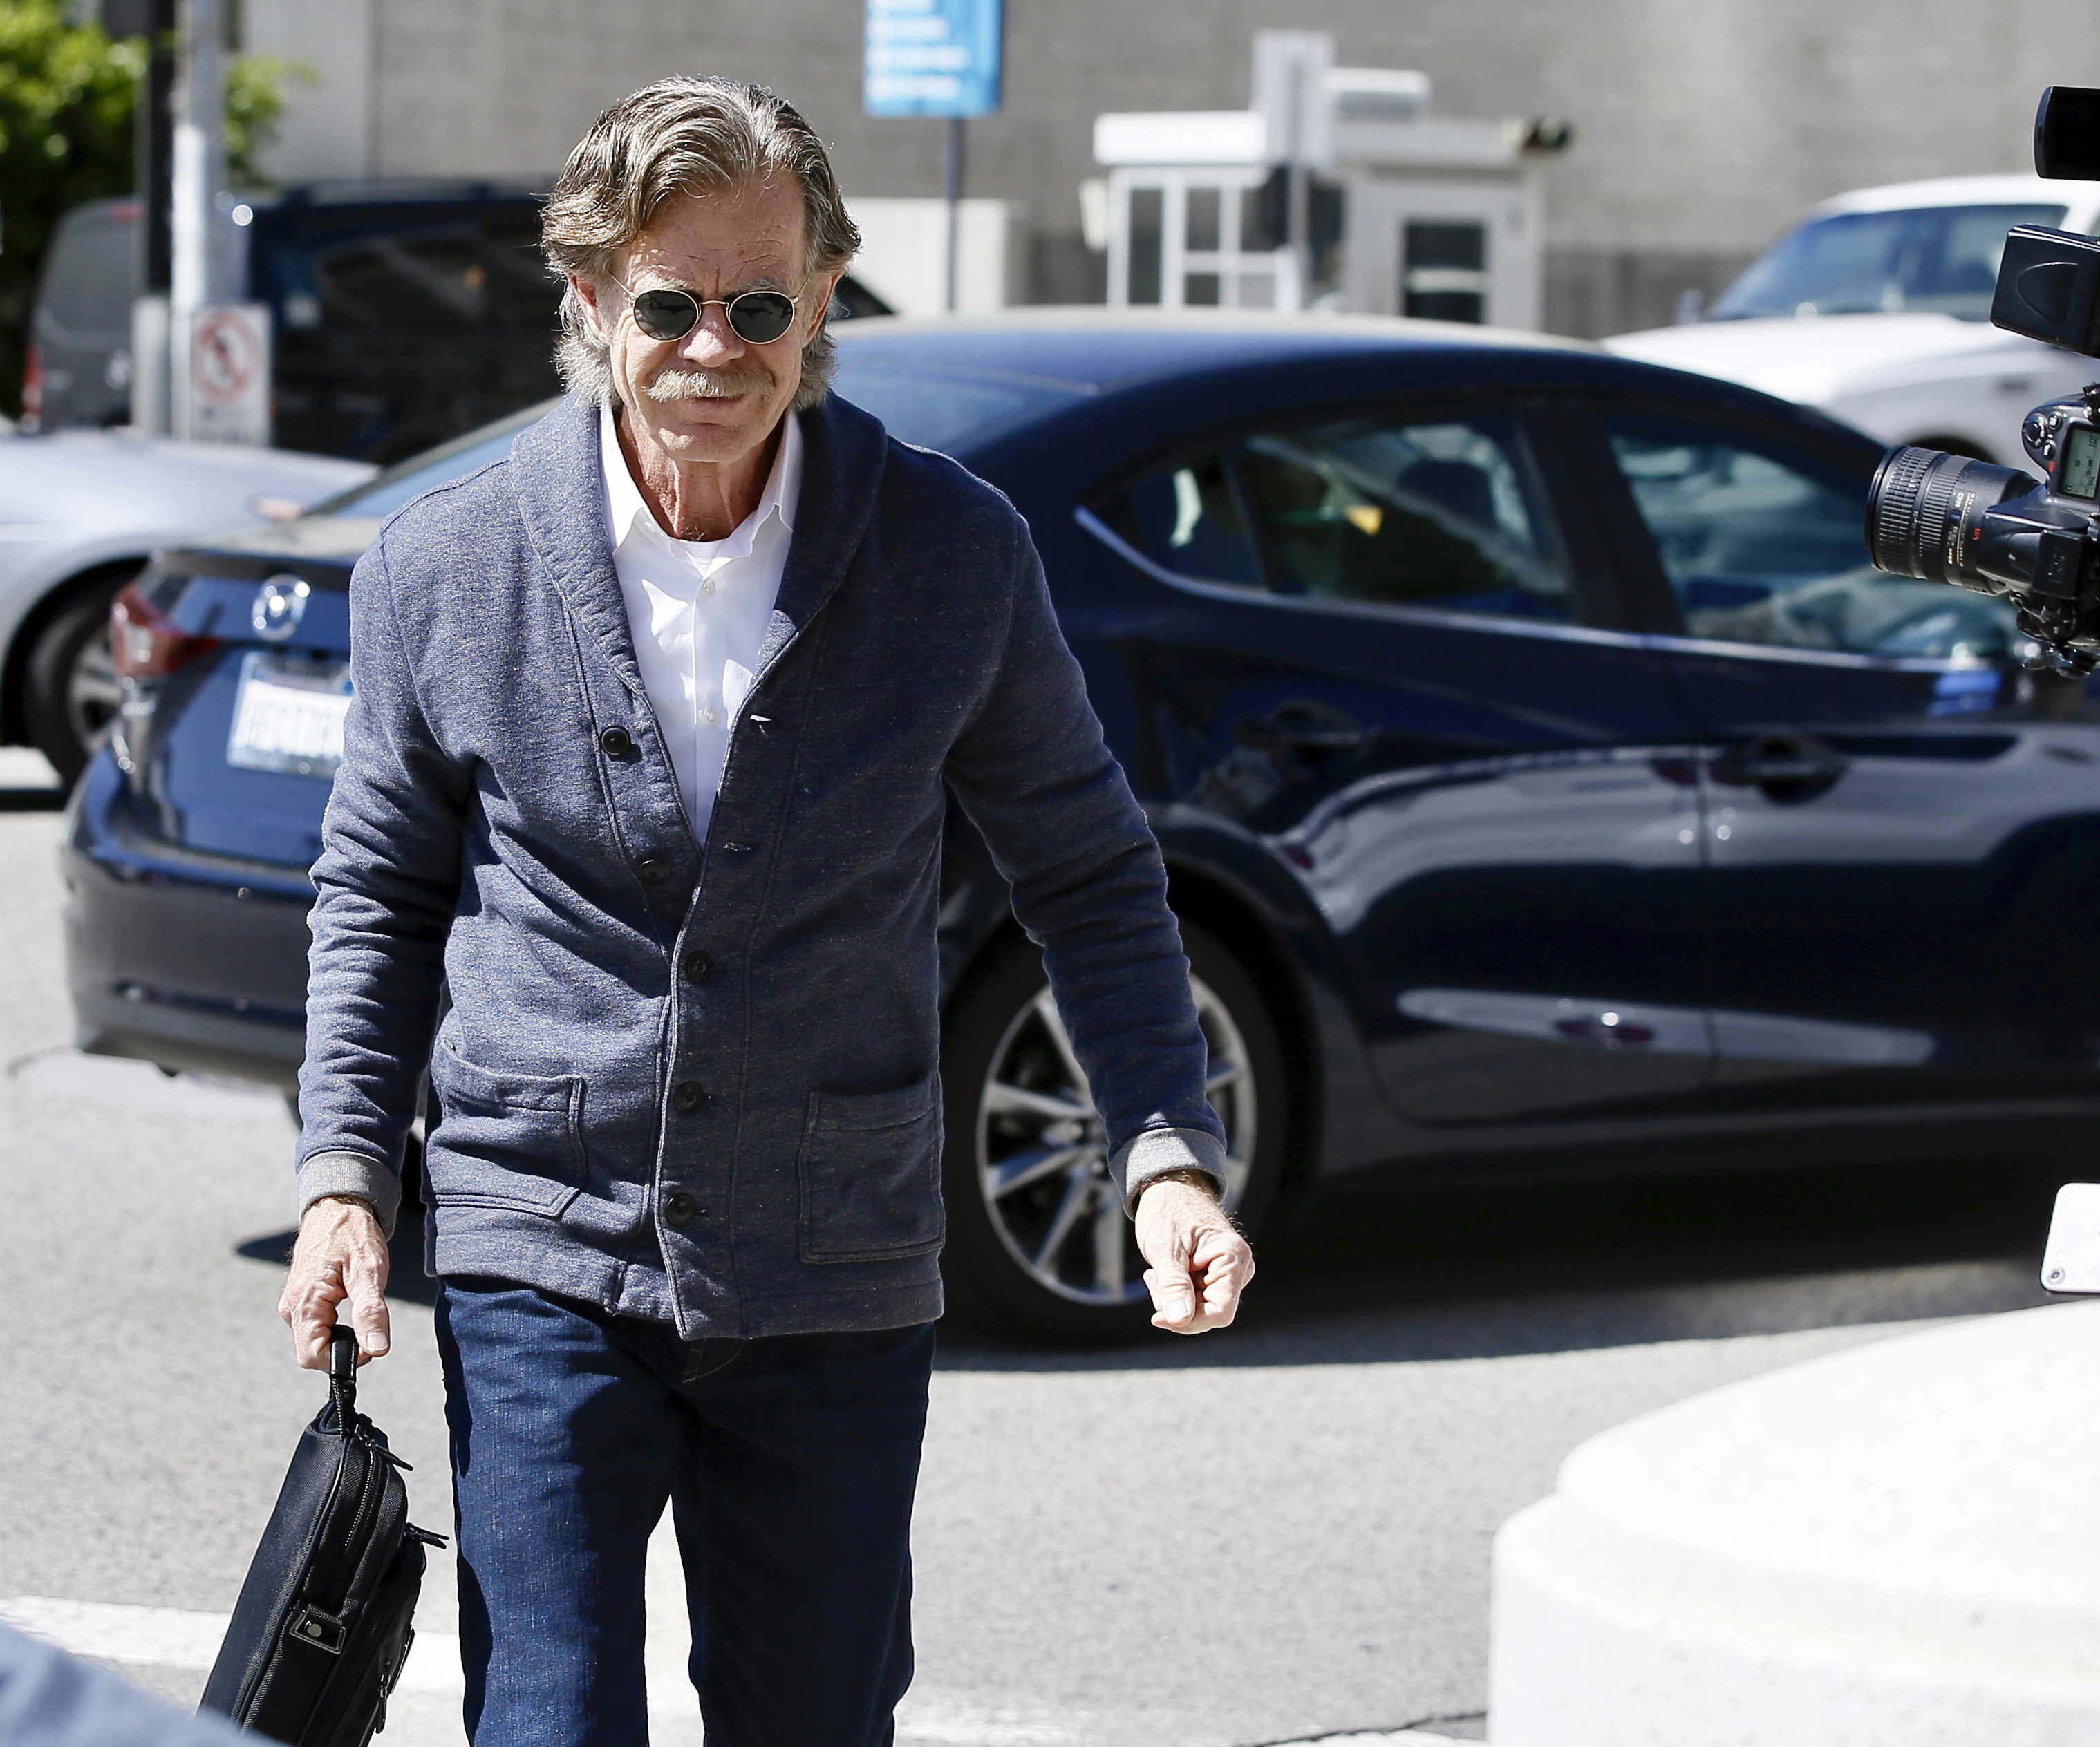 Actor William H. Macy arrives at the federal courthouse in Los Angeles, on Tuesday, March 12, 2019. Fifty people, including Macy's wife, actress Felicity Huffman and actress Lori Loughlin, were charged Tuesday in a scheme in which wealthy parents allegedly bribed college coaches and other insiders to get their children into some of the nation's most elite schools. Macy was not charged; authorities did not say why. (AP Photo/Alex Gallardo) (Alex Gallardo—AP)